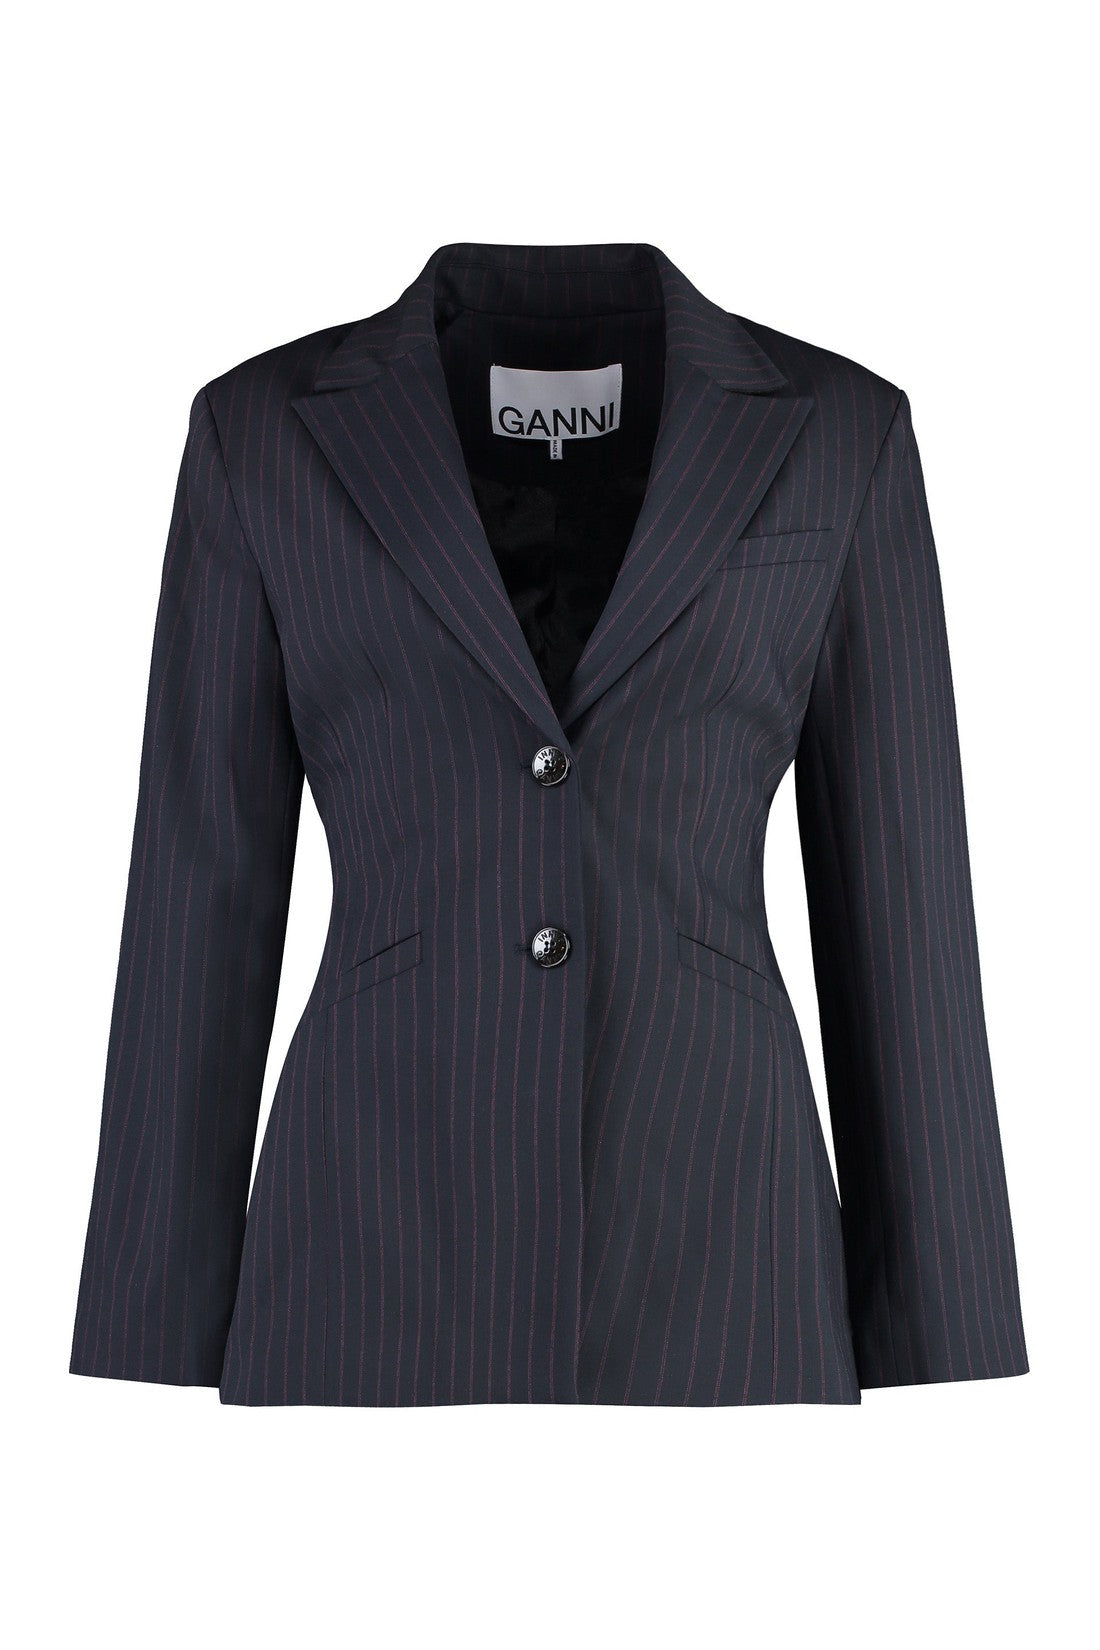 GANNI-OUTLET-SALE-Single-breasted two-button blazer-ARCHIVIST